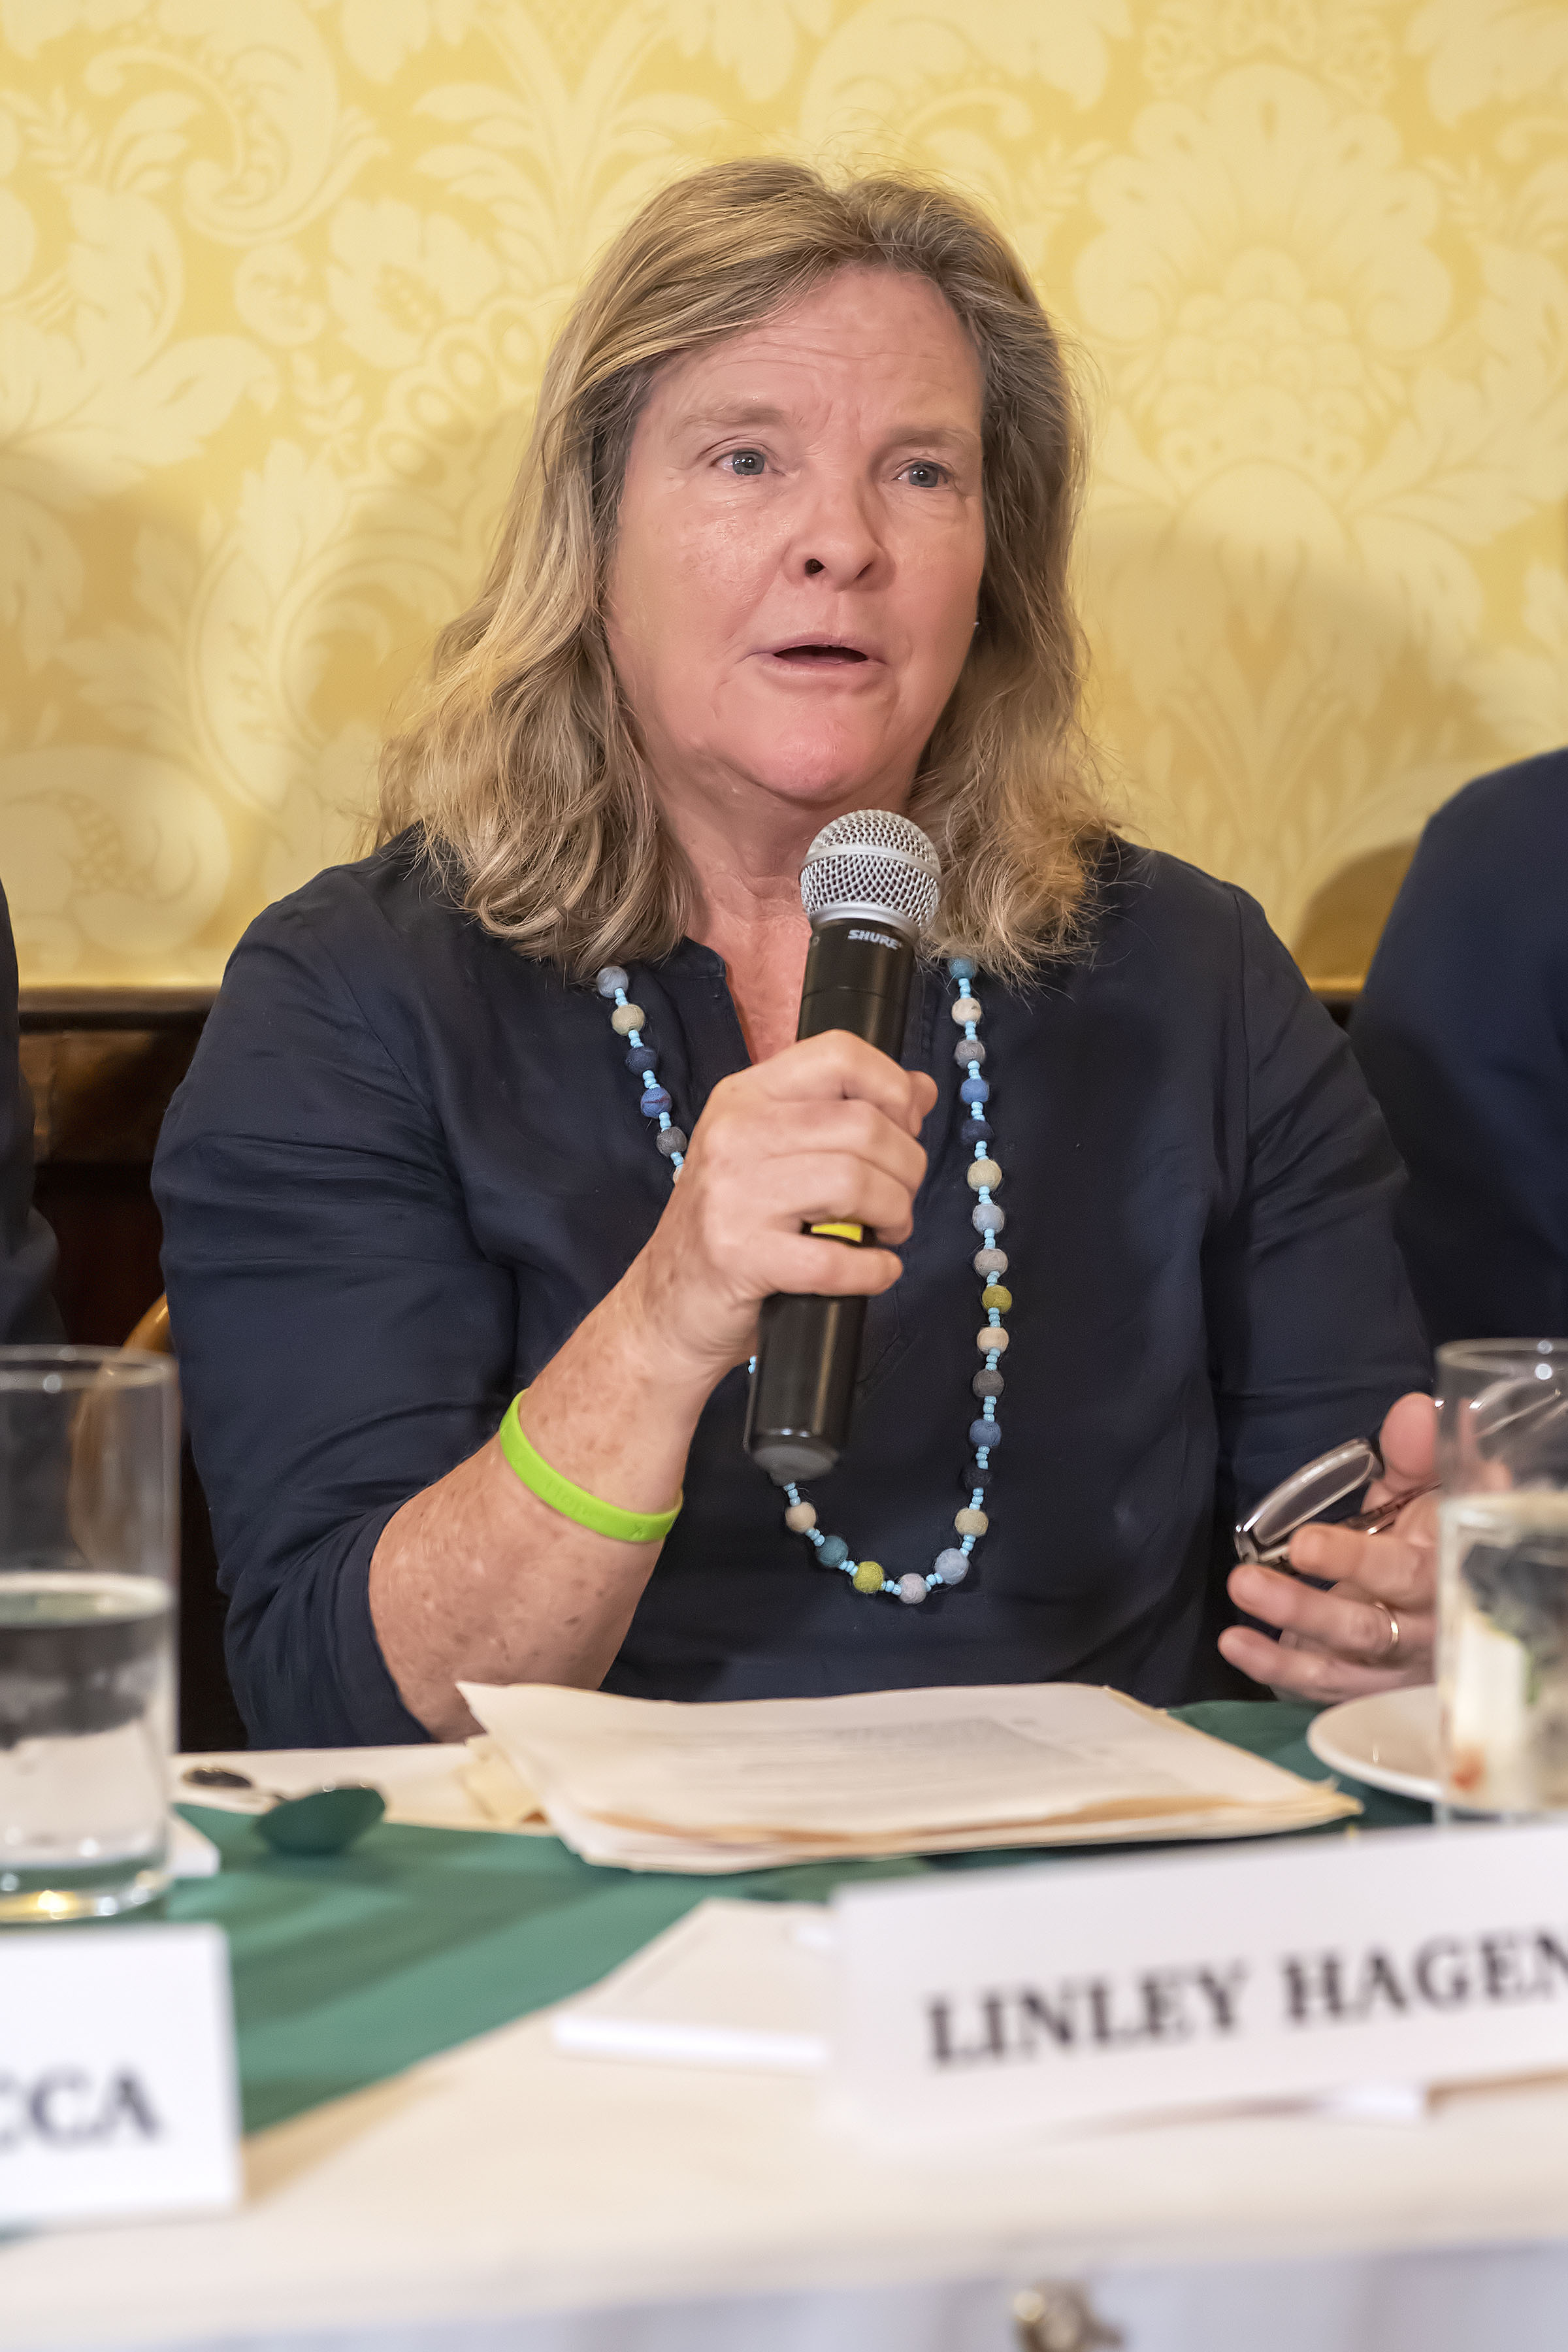 Panelist Linley Hagen speaks during the Express Sessions - Sag Harbor Public Spaces event at the American Hotel in Sag Harbor on Friday.   MICHAEL HELLER